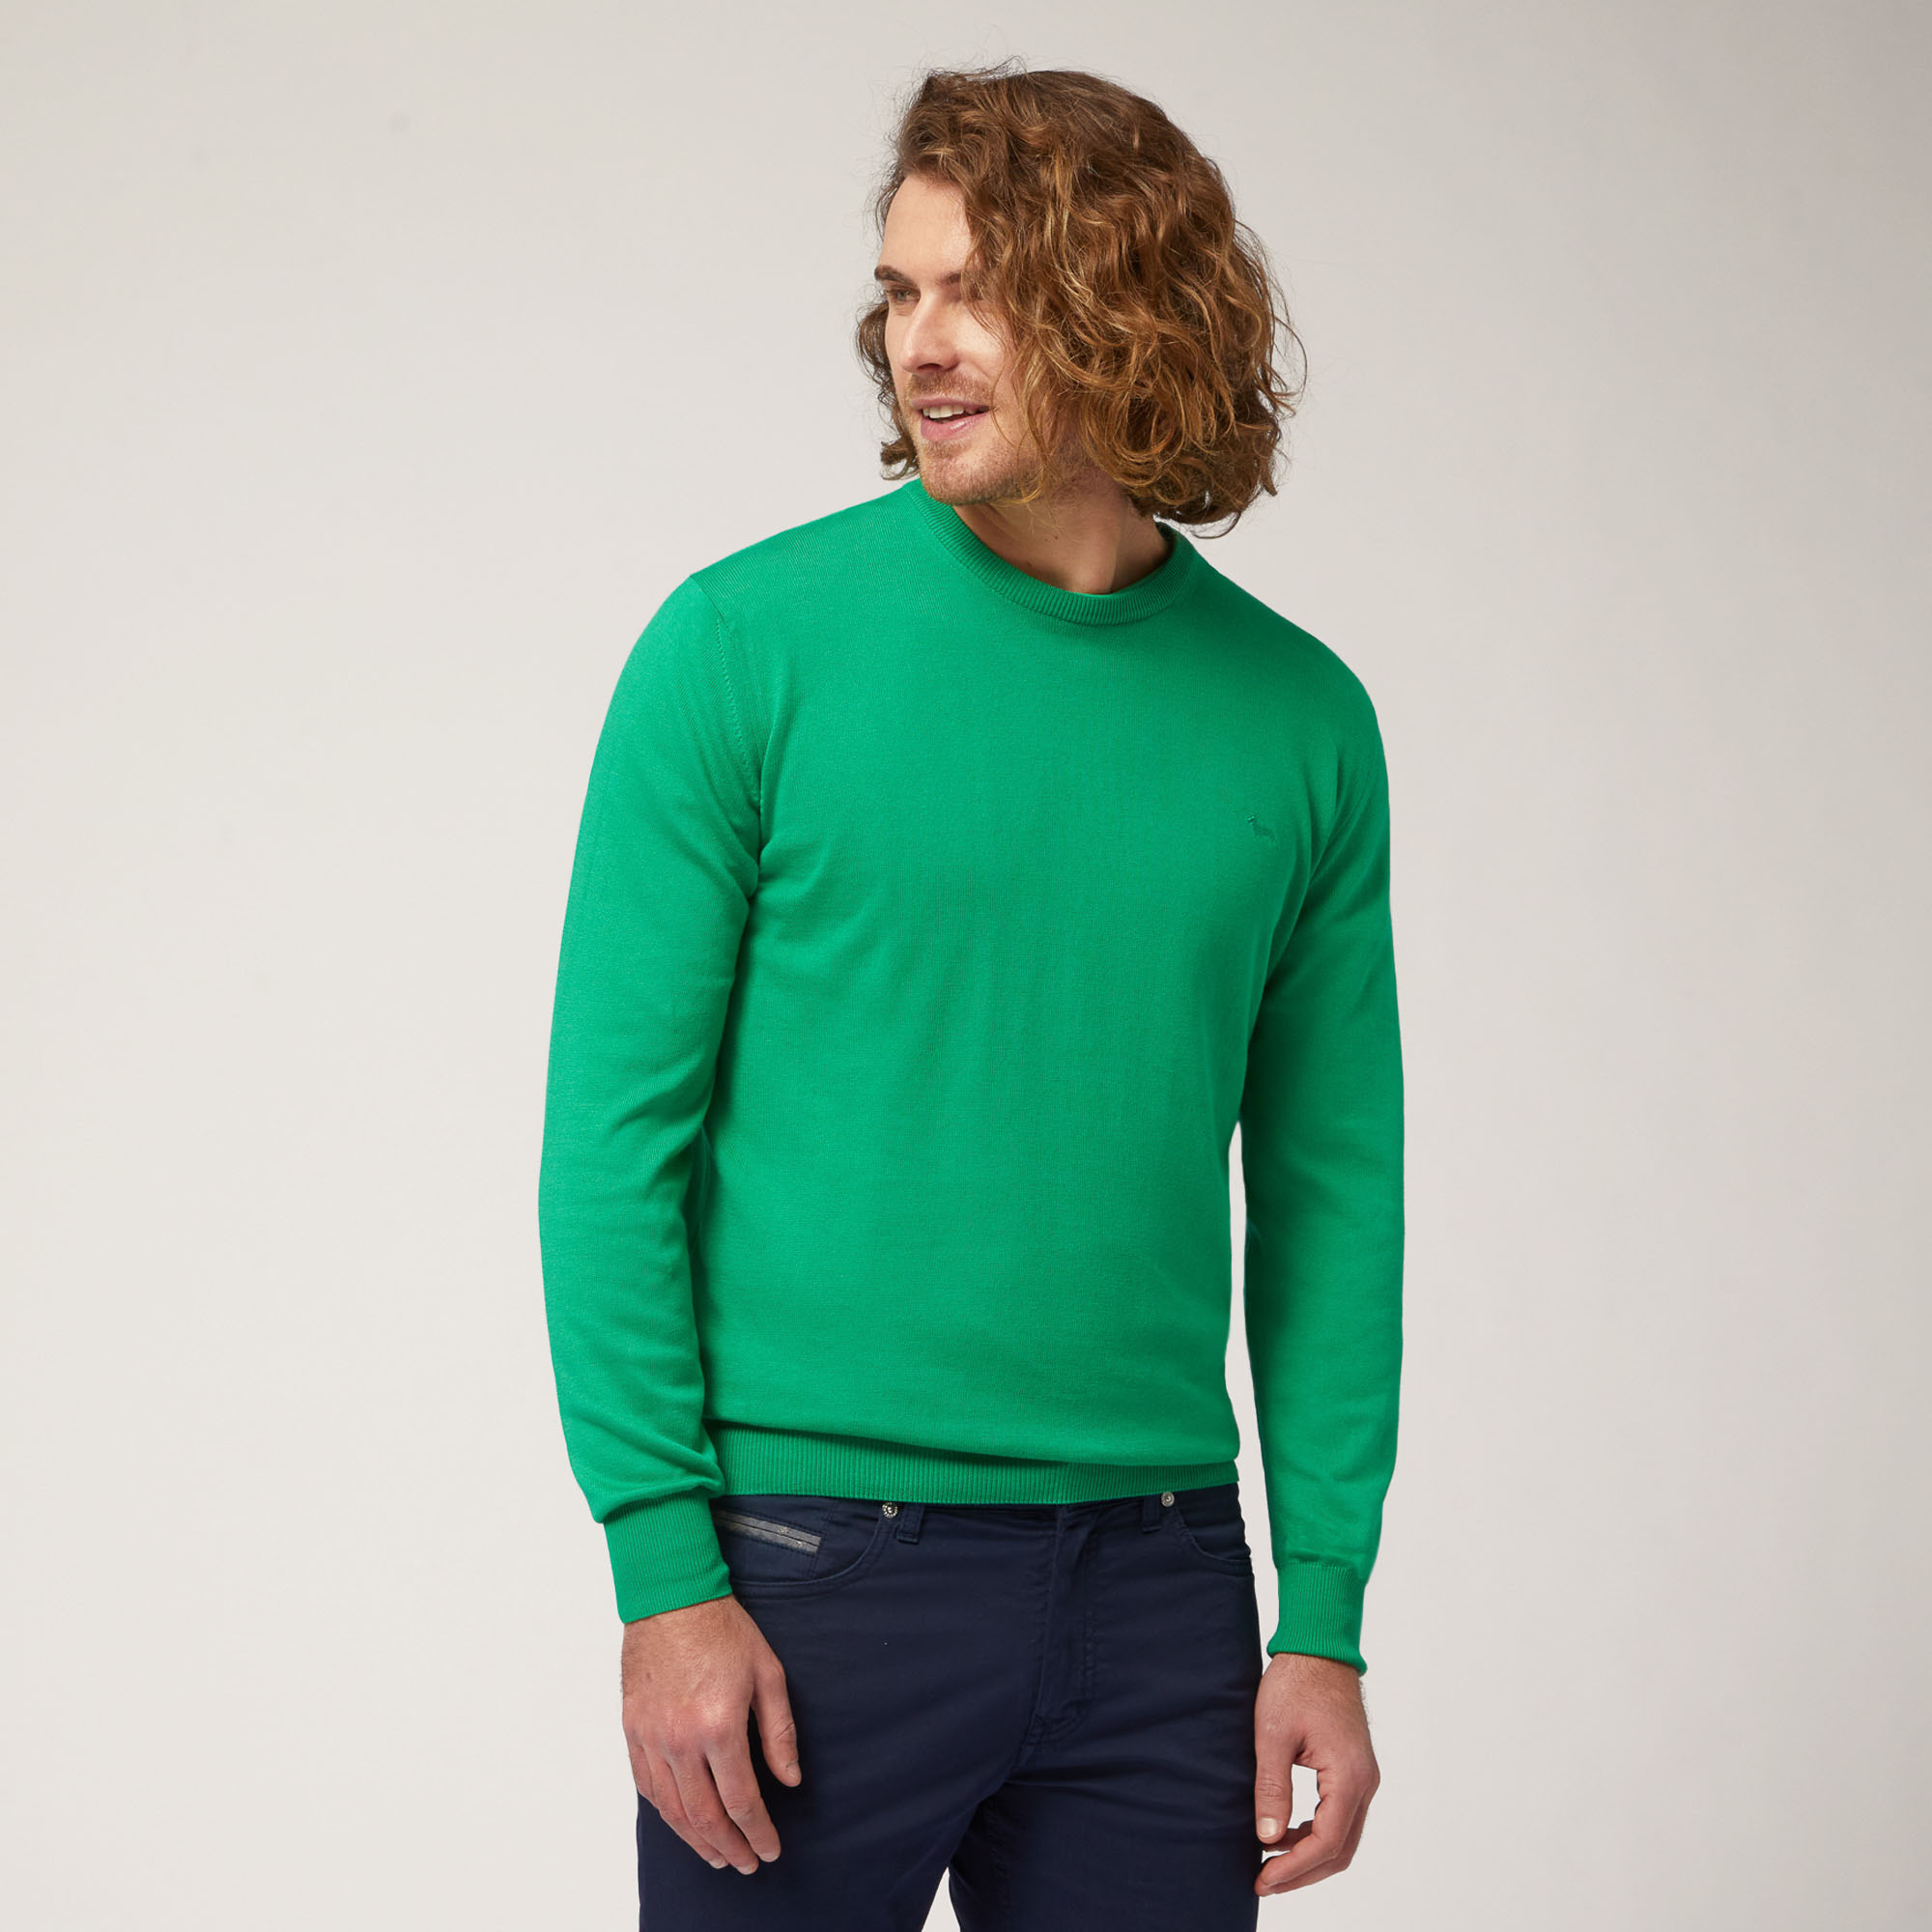 Cotton Crew Neck Pullover, Herb, large